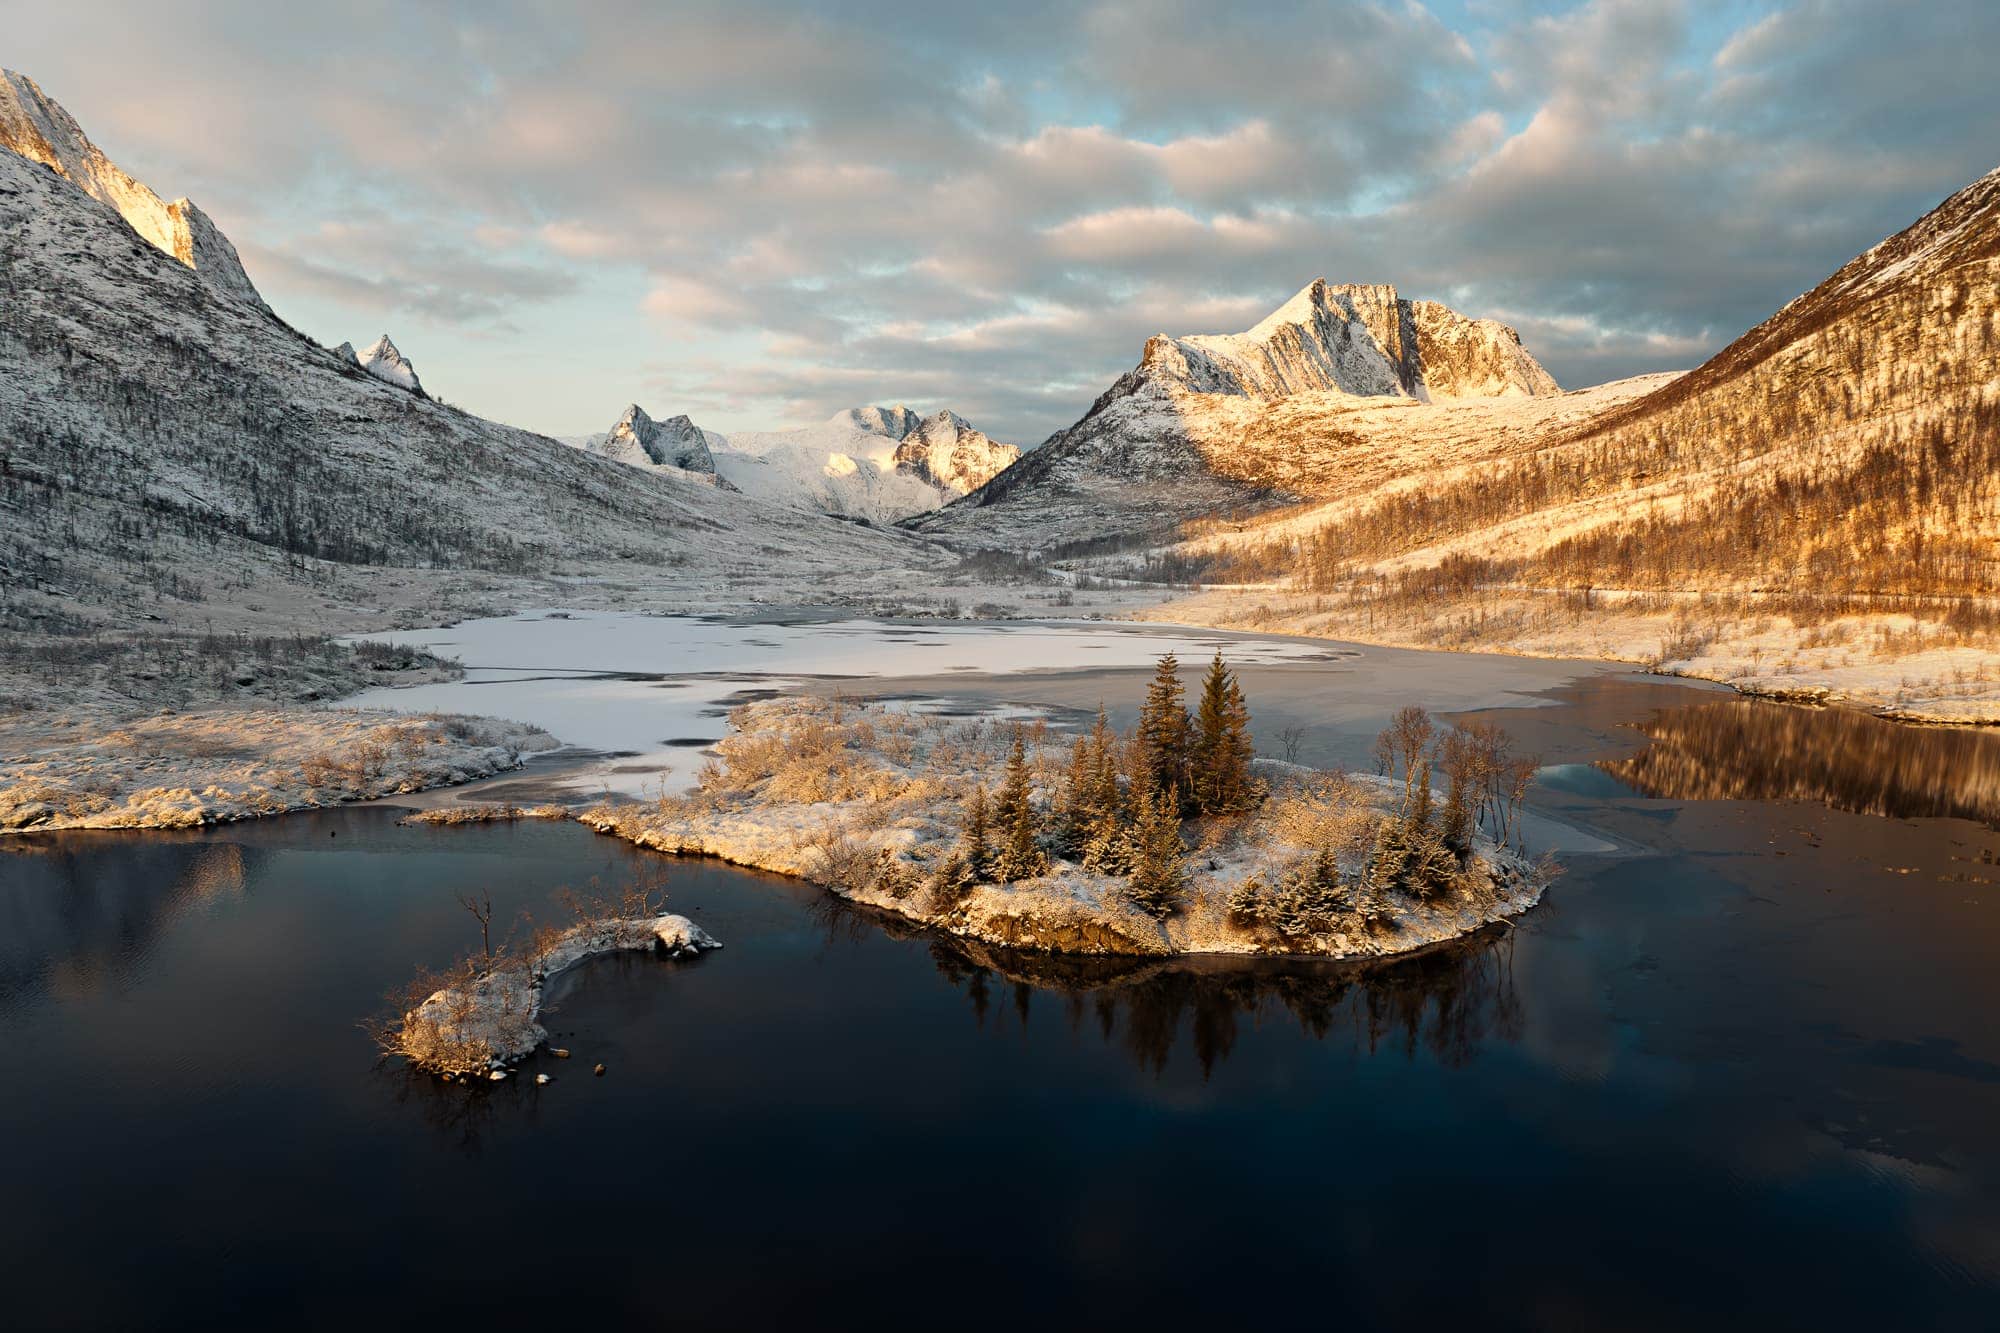 Sunset illuminating the snowy peaks and frozen lake of Holvatnet in Senja, Norway, with frosted trees on an islet.